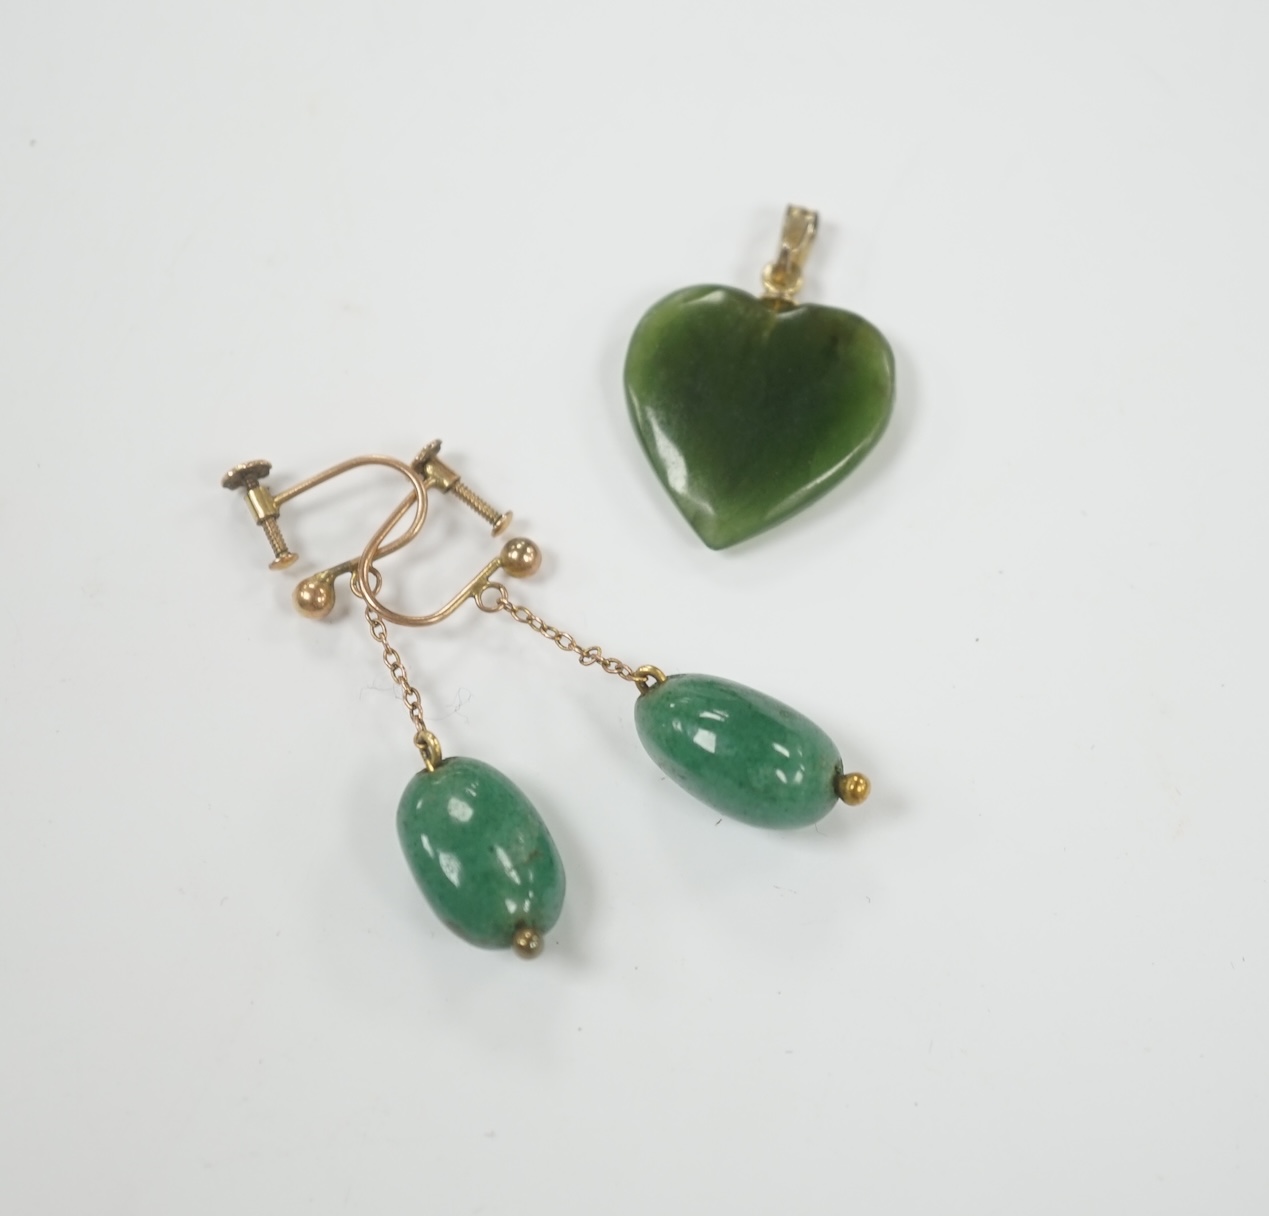 A gilt metal mounted nephrite heart shape pendant, 20mm and a pair of simulated jade earrings.